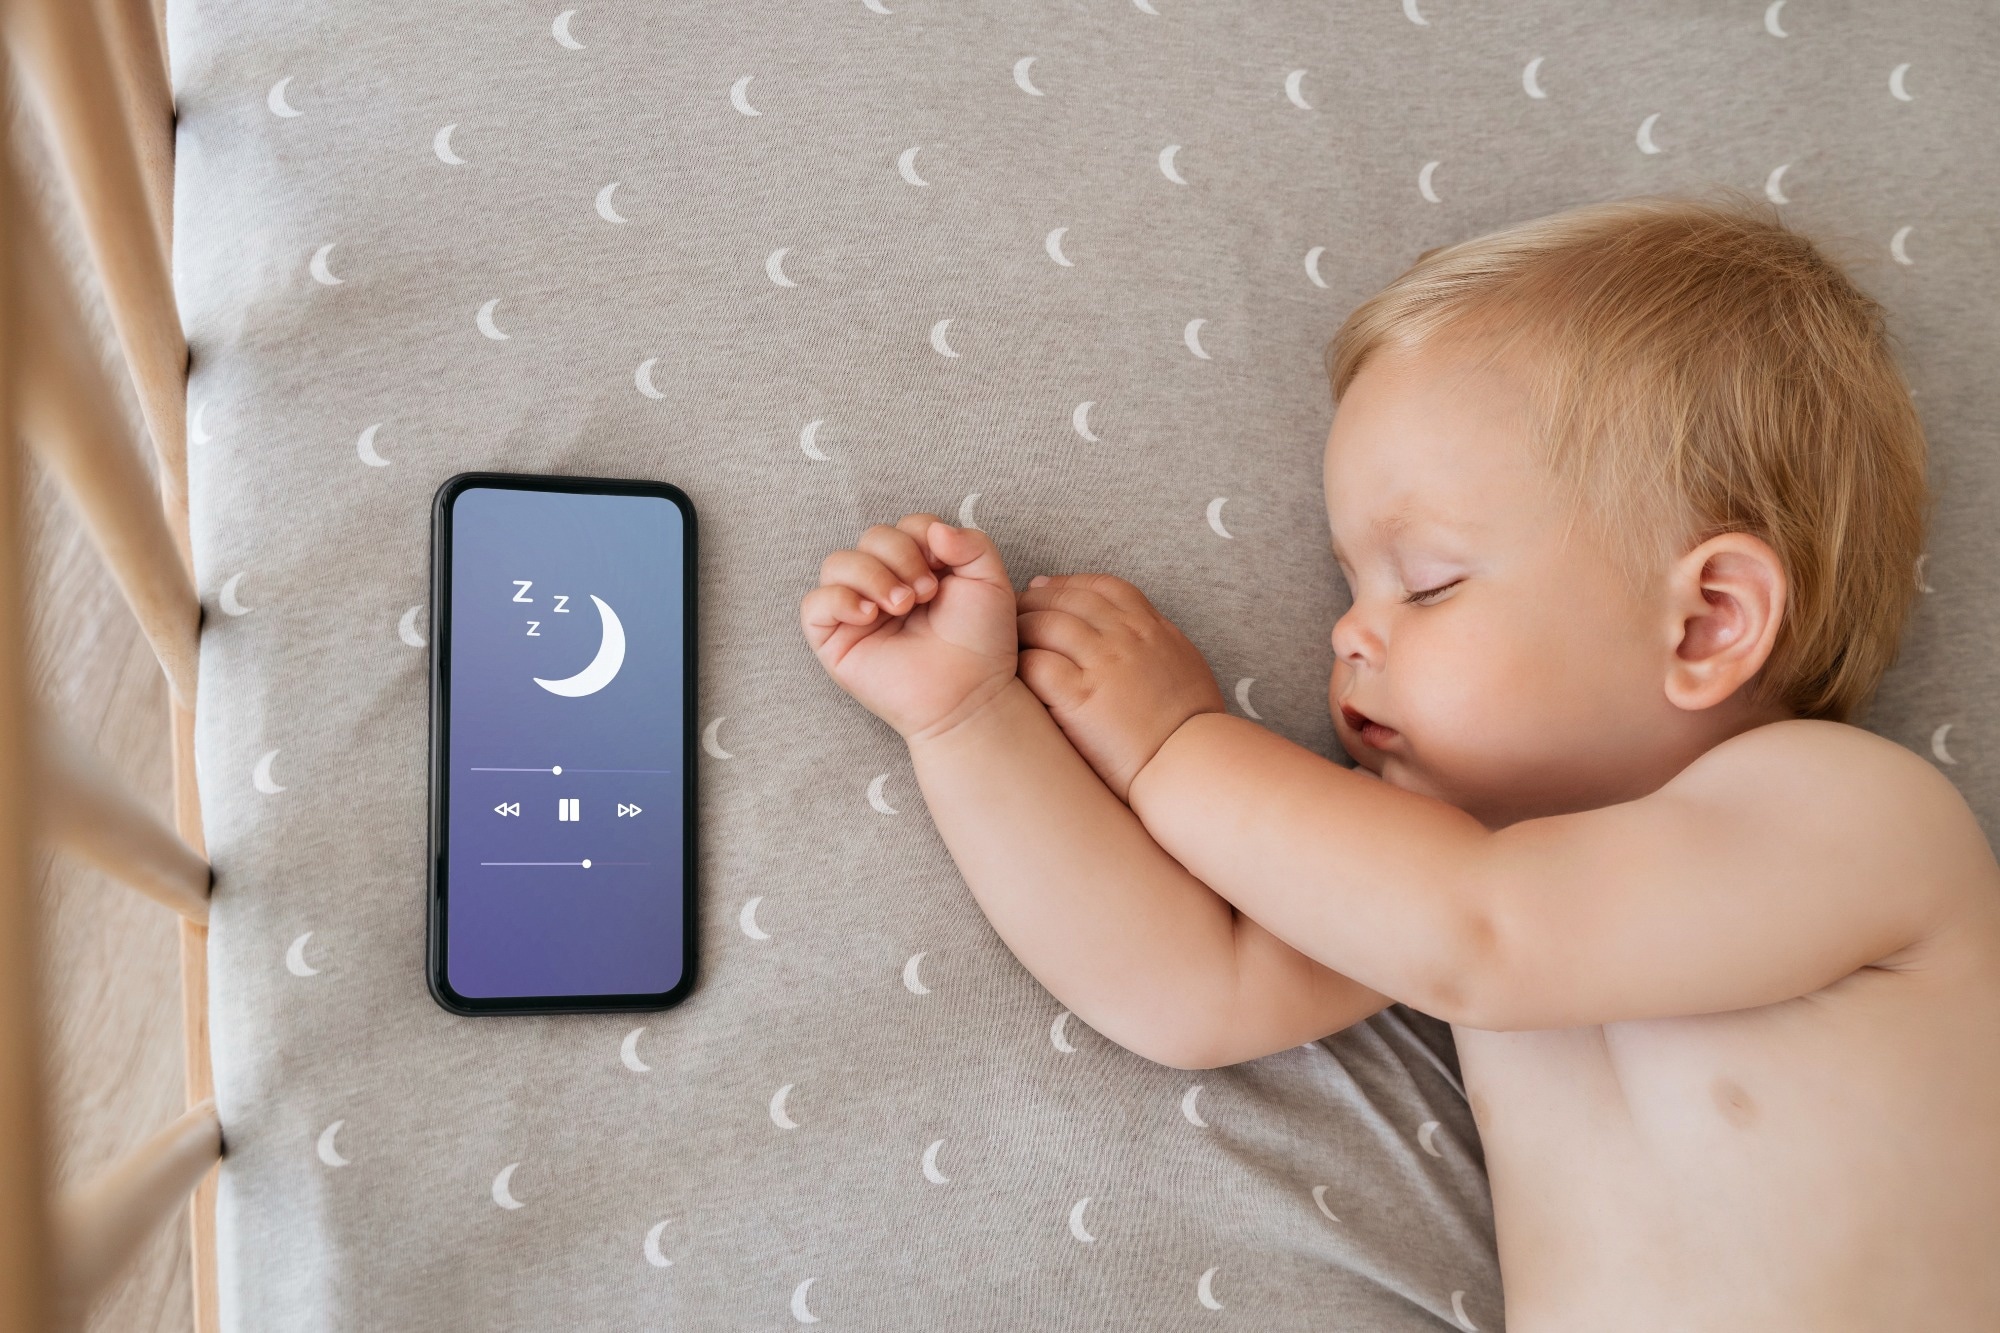 Study: The impact of extreme summer temperatures in the United Kingdom on infant sleep: Implications for learning and development. Image Credit: ArseniiPalivoda/Shutterstock.com